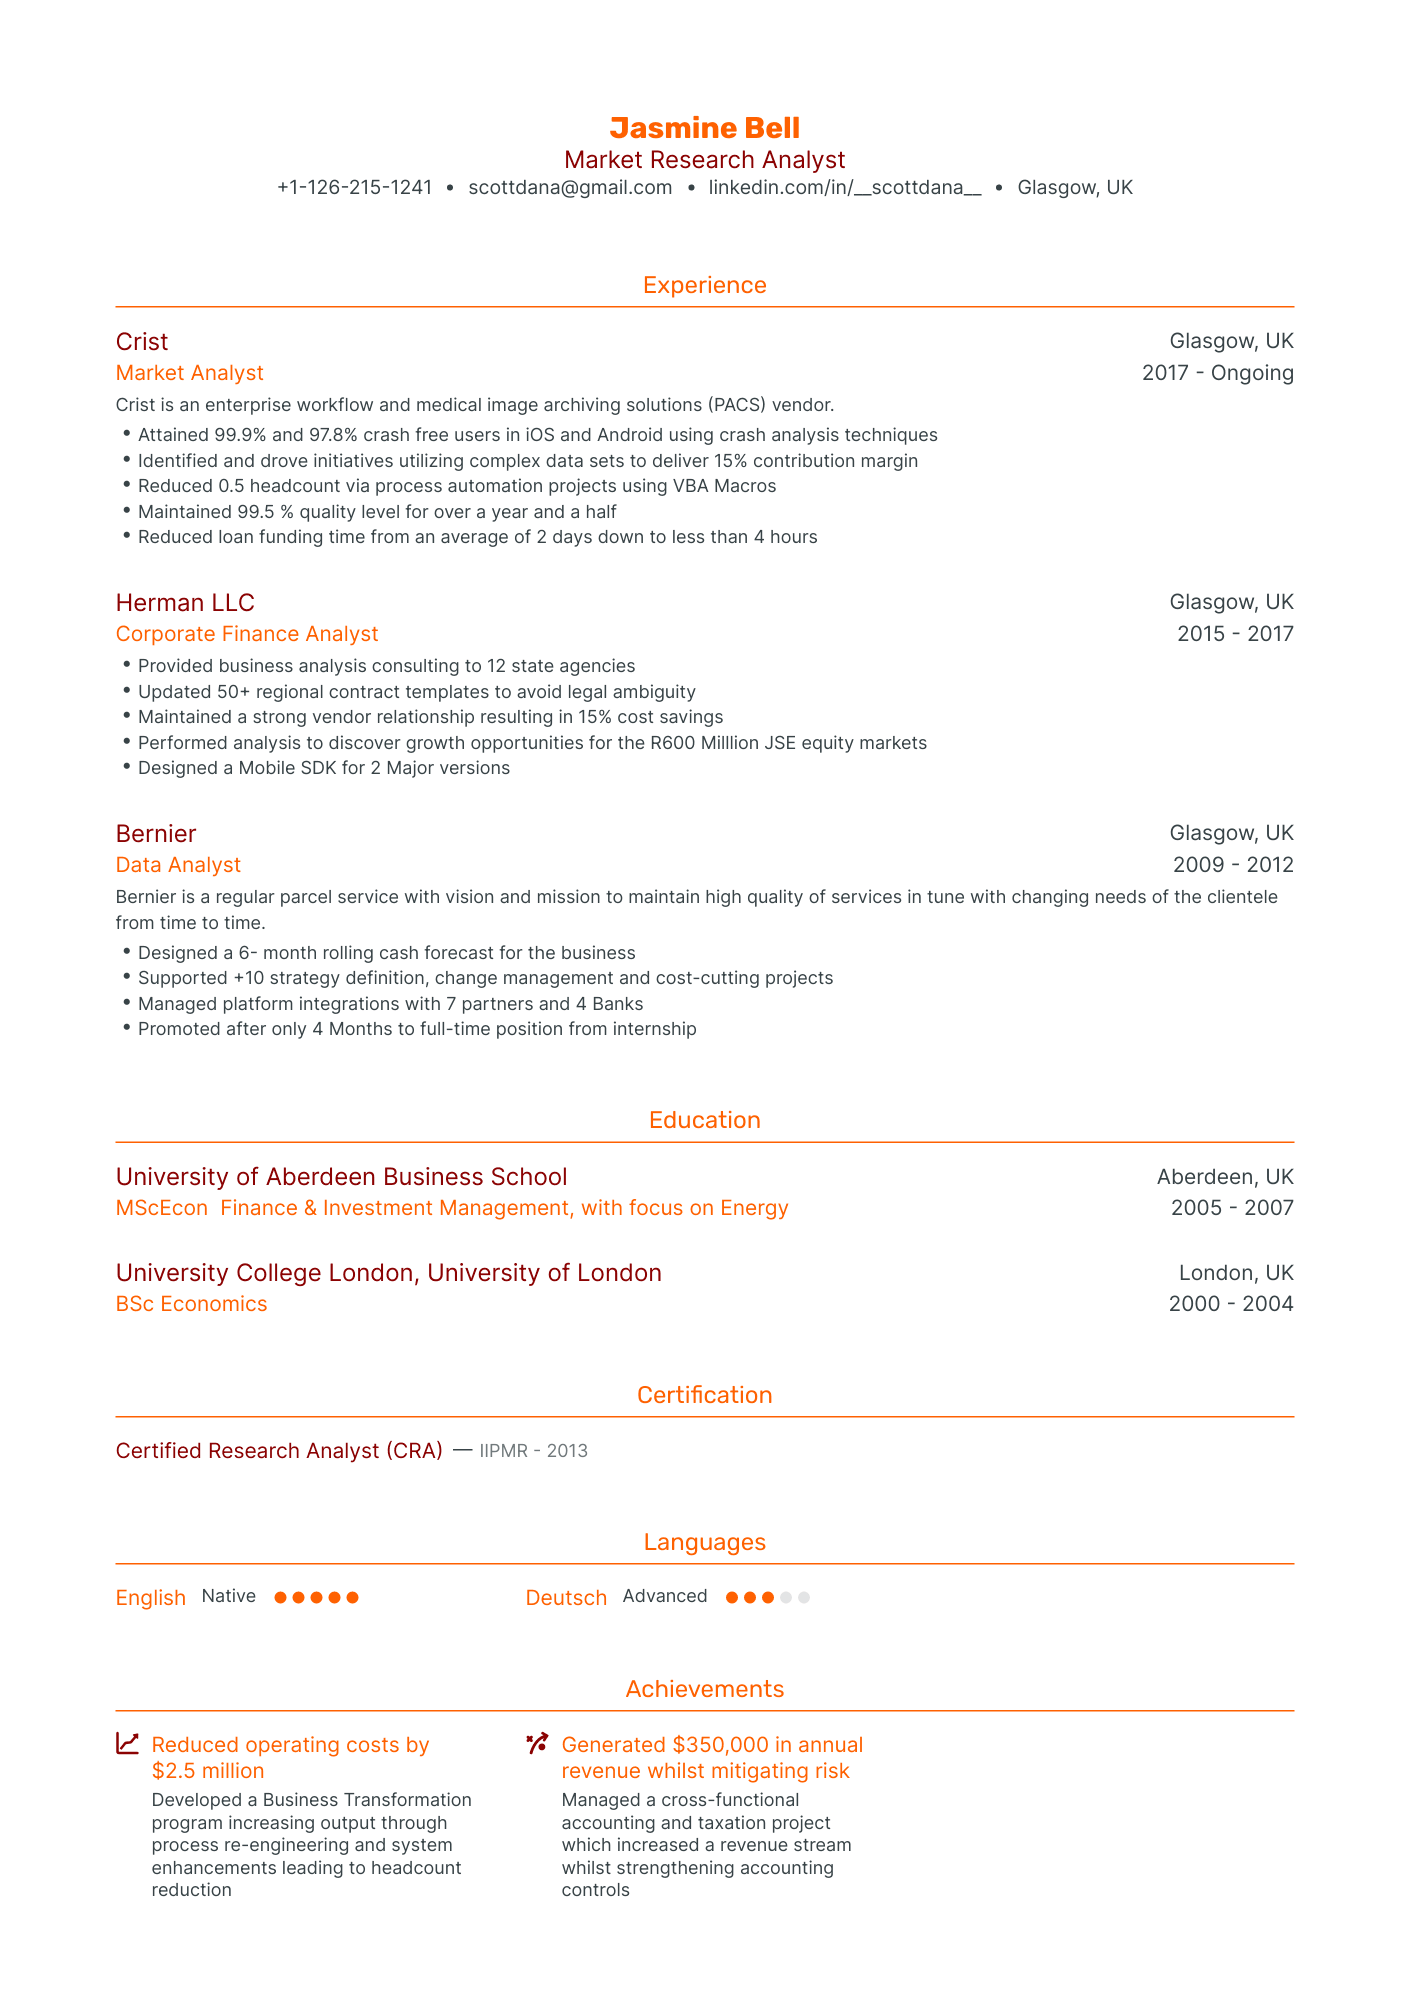 Traditional Market Research Resume Template